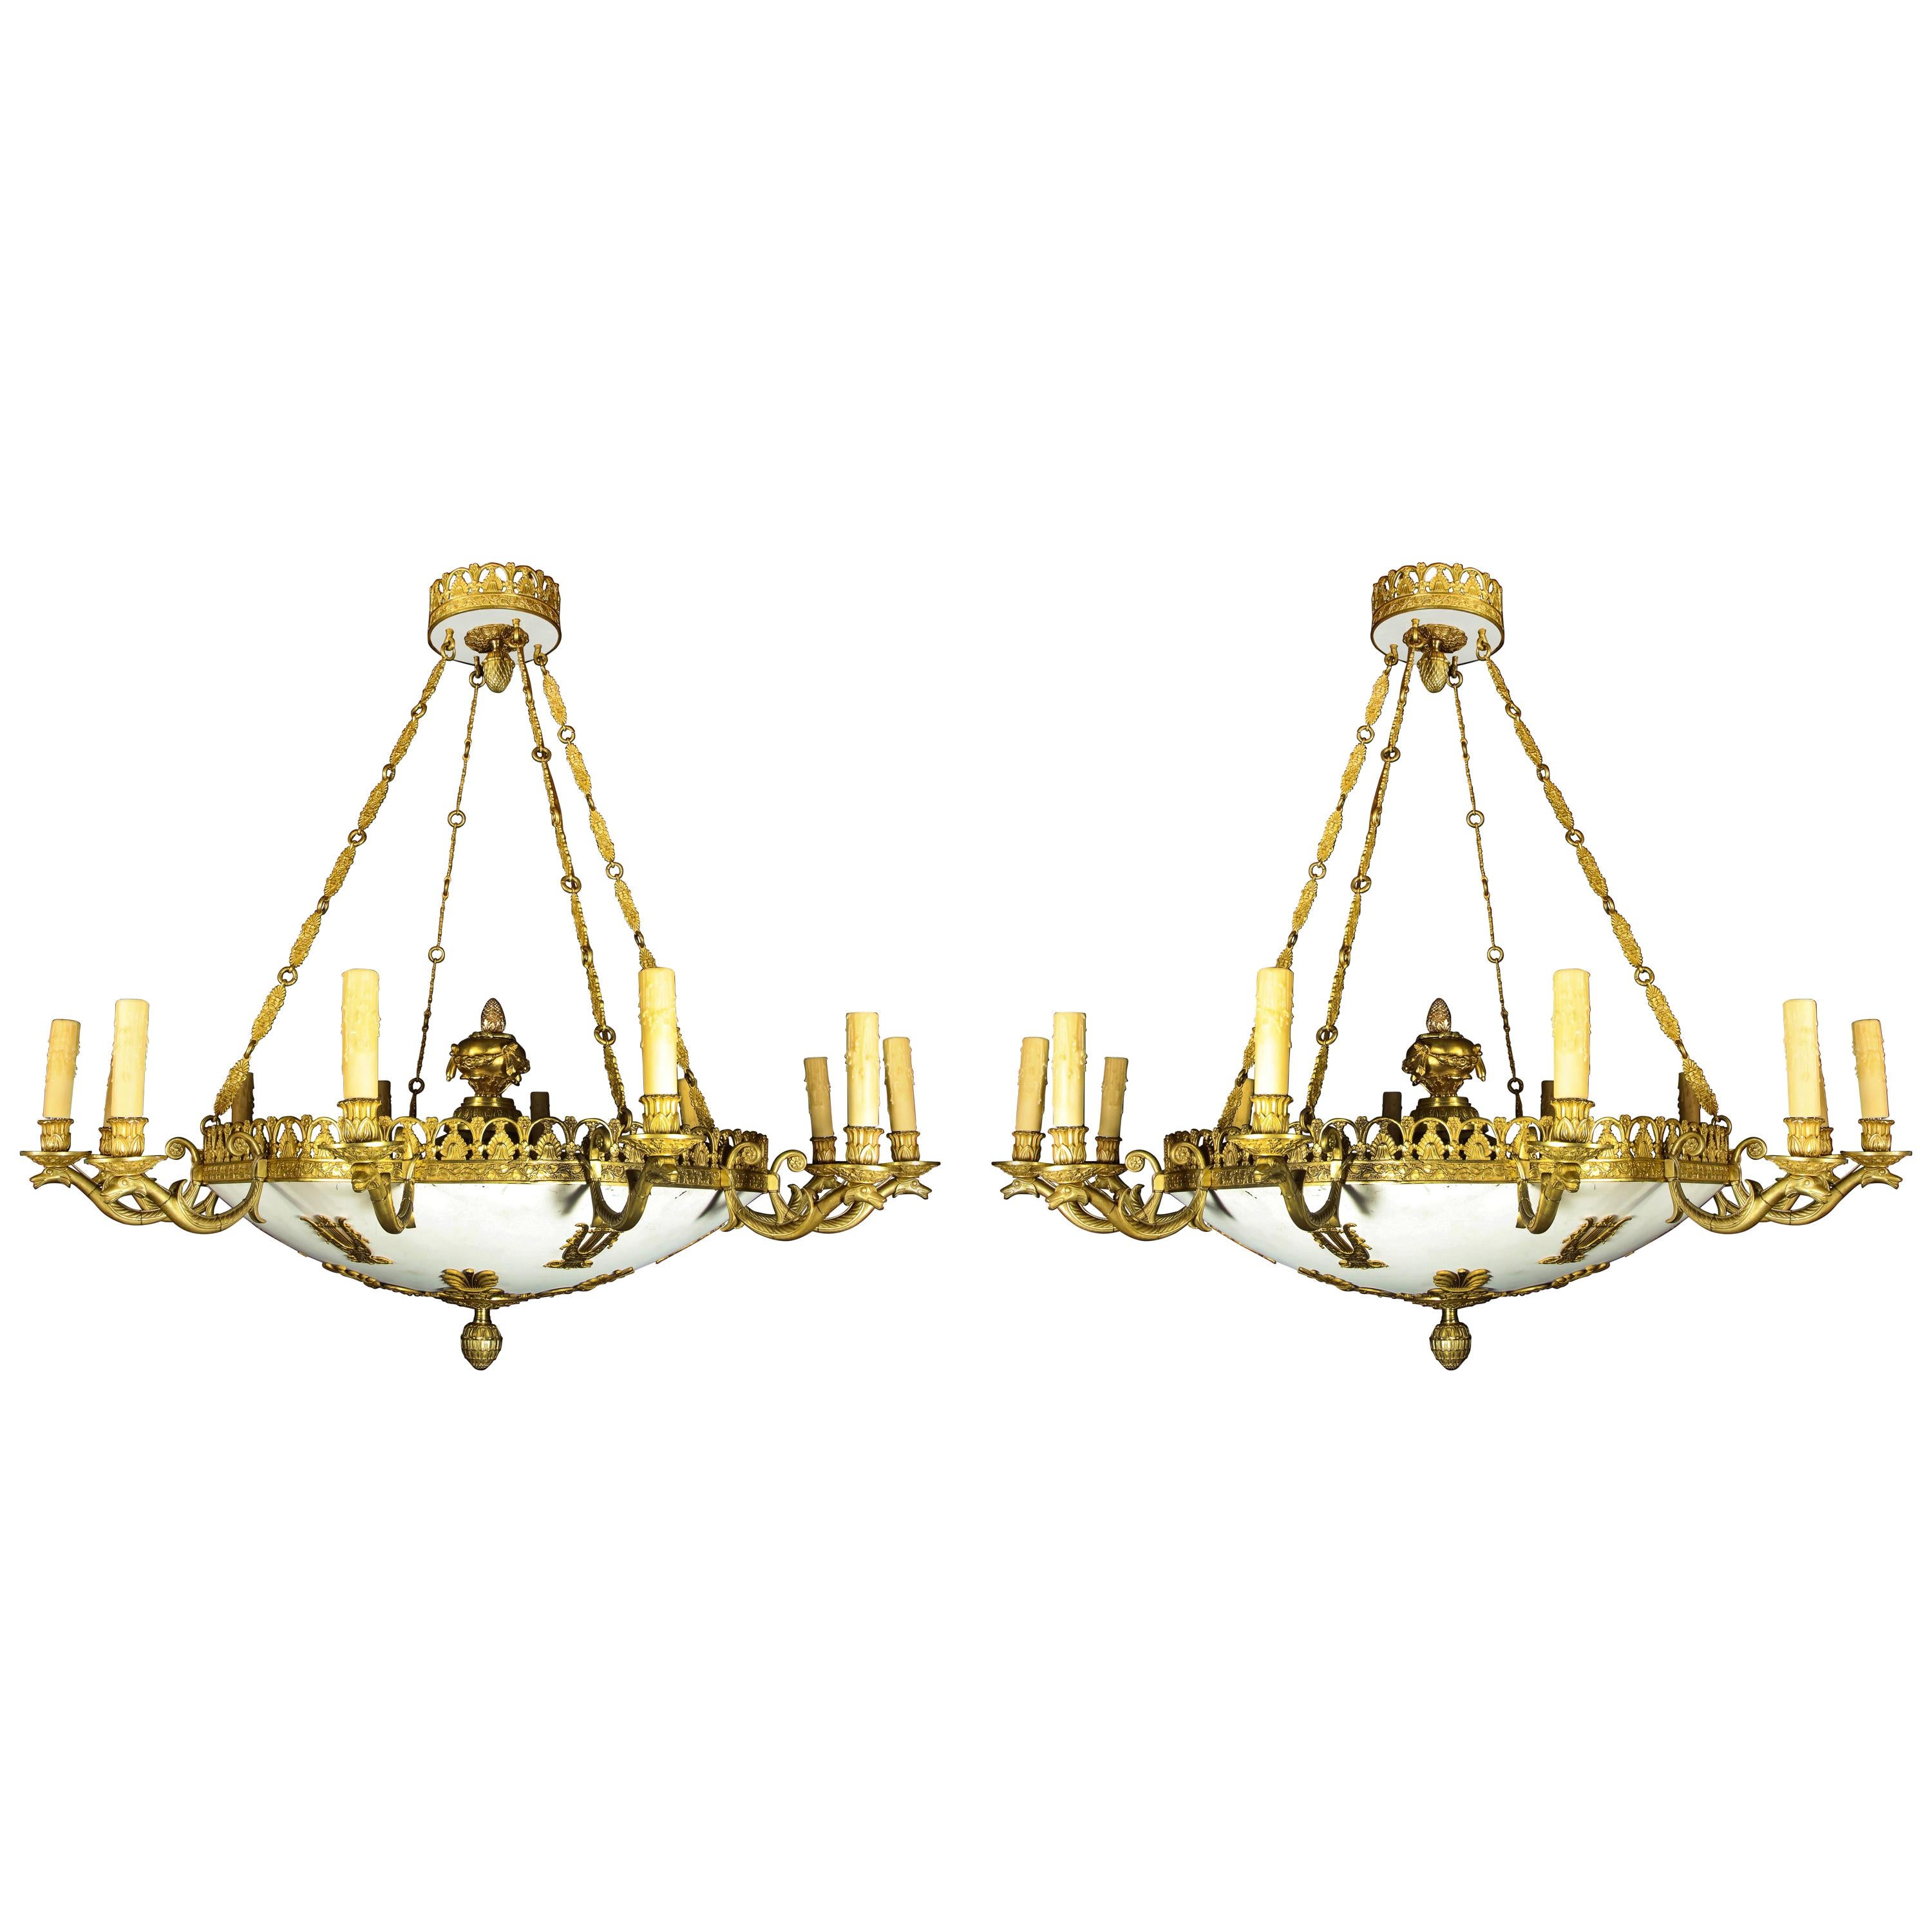 Pair of Large and Important Antique French Empire Gilt Bronze Chandeliers For Sale